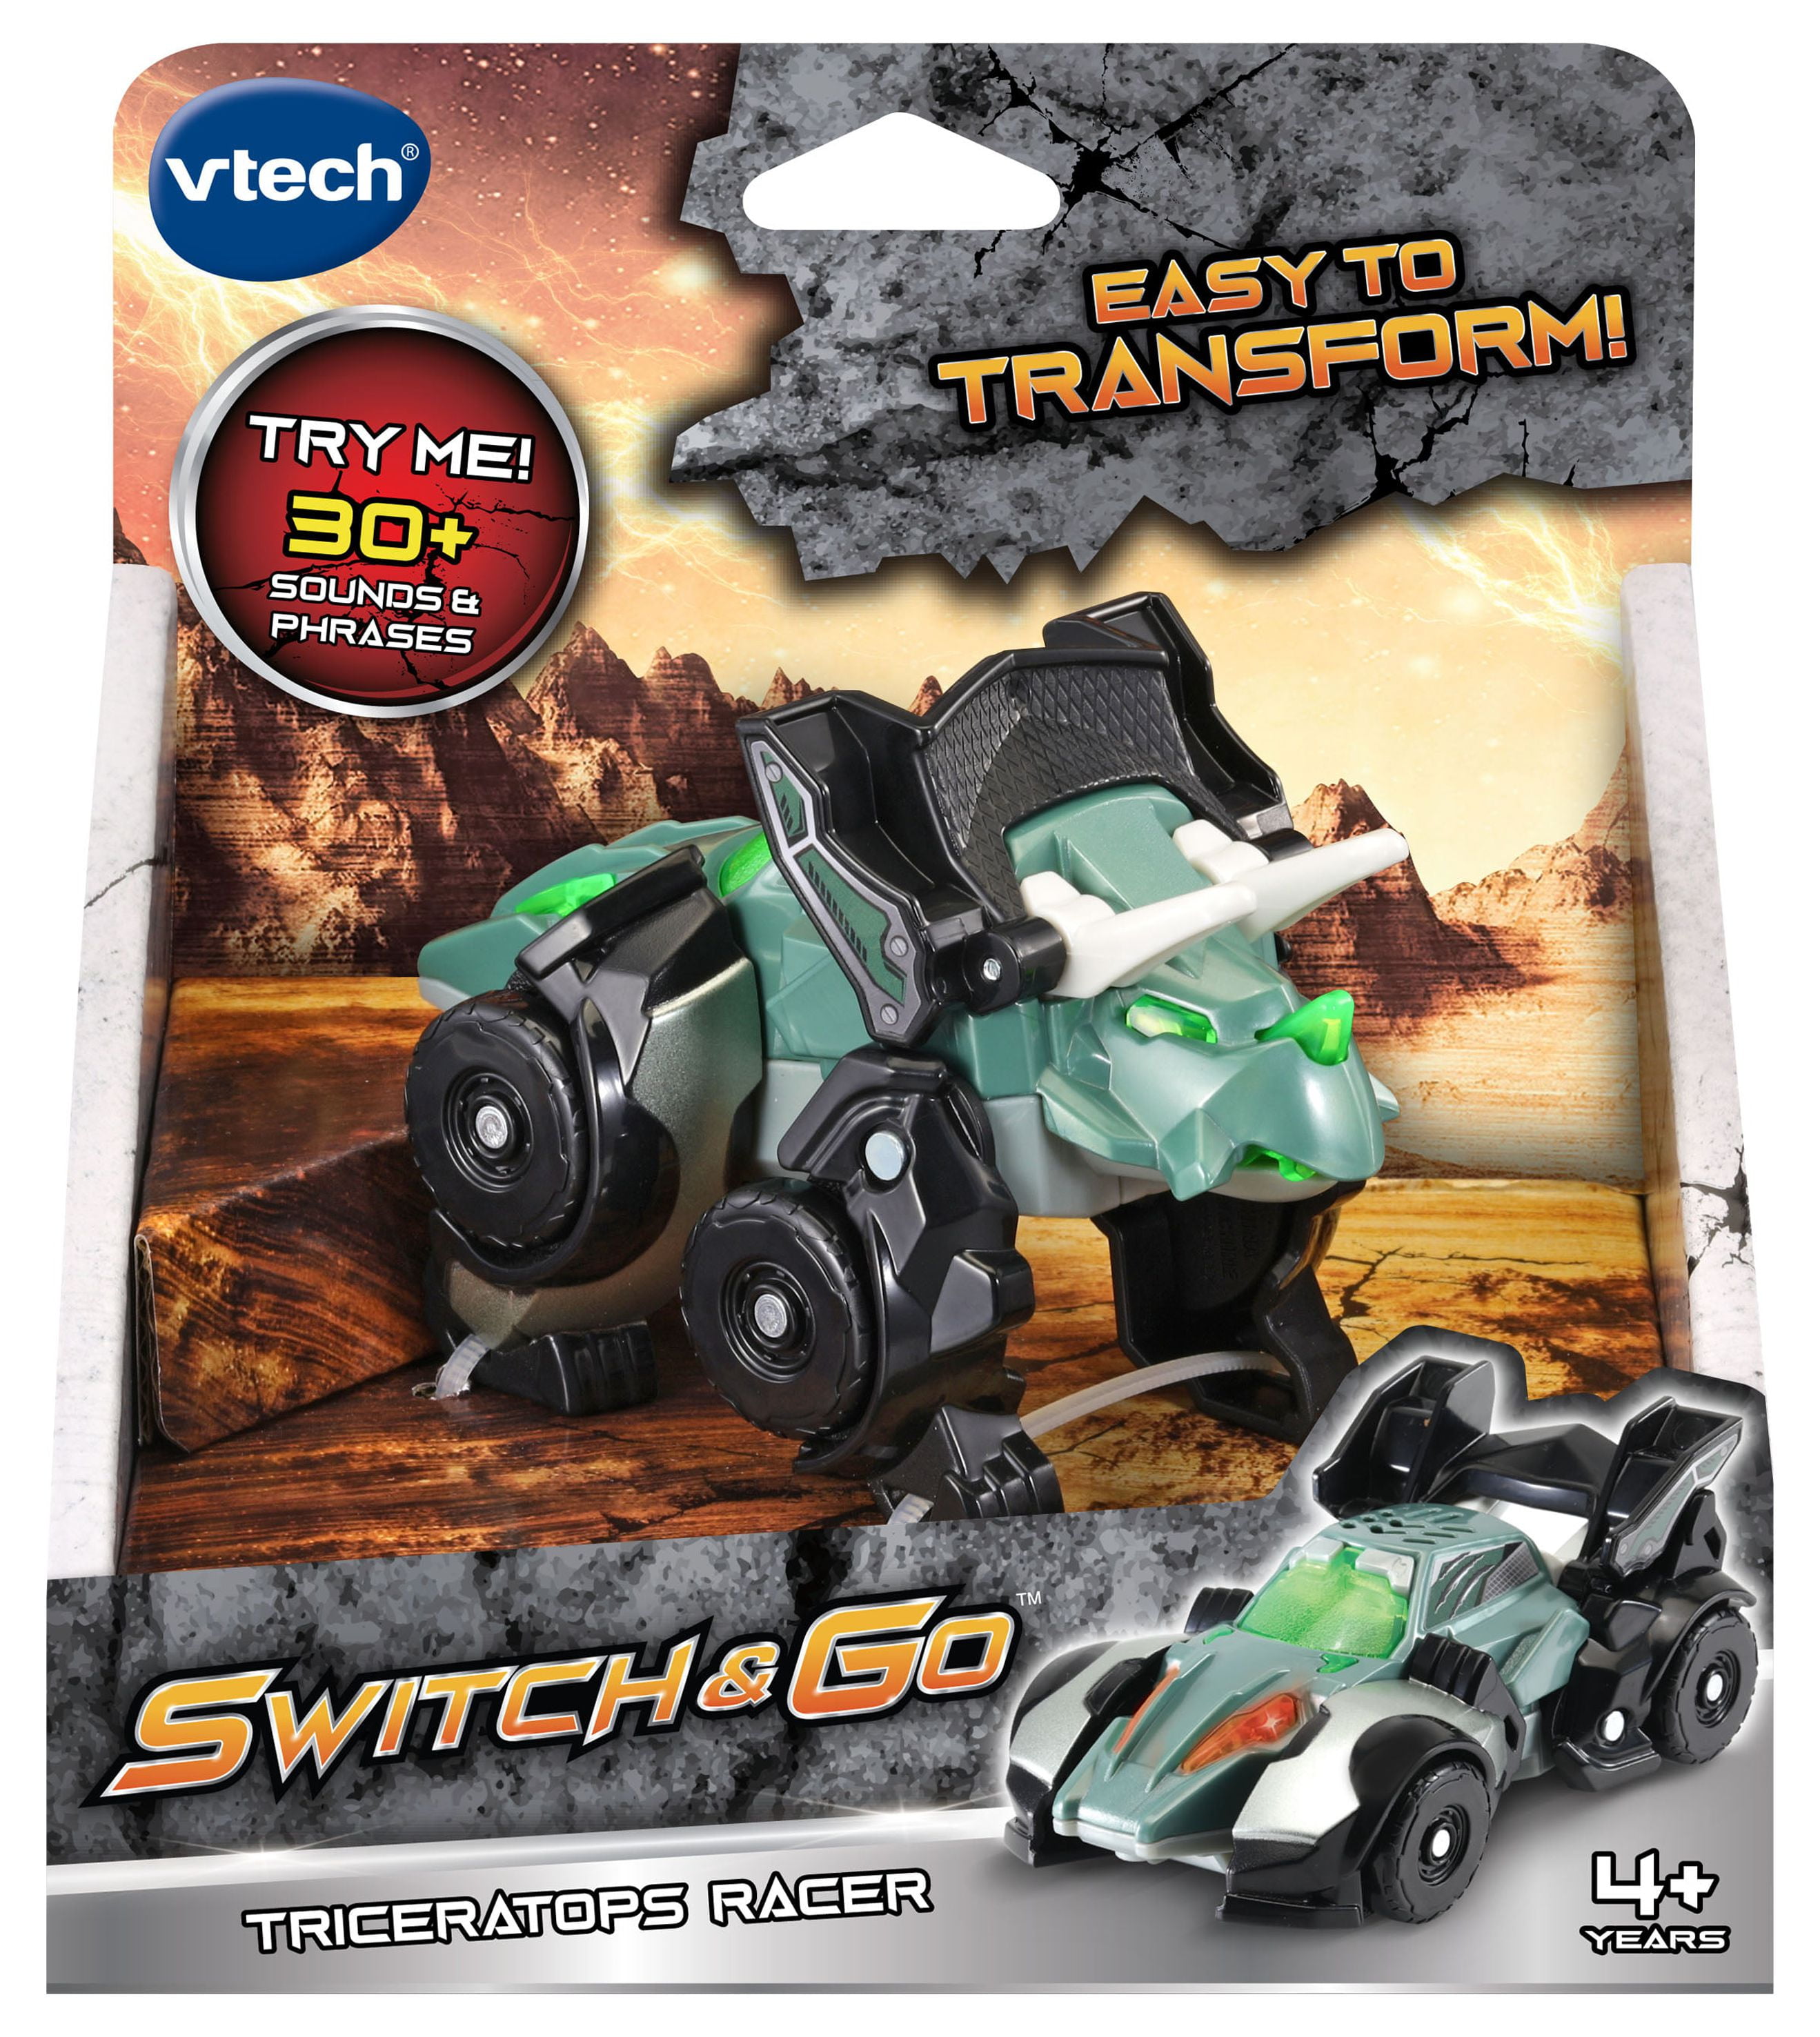 VTech Switch & Go Dinos Review + Contest For Lifetime Supply Of Toys -  Mom's Blog